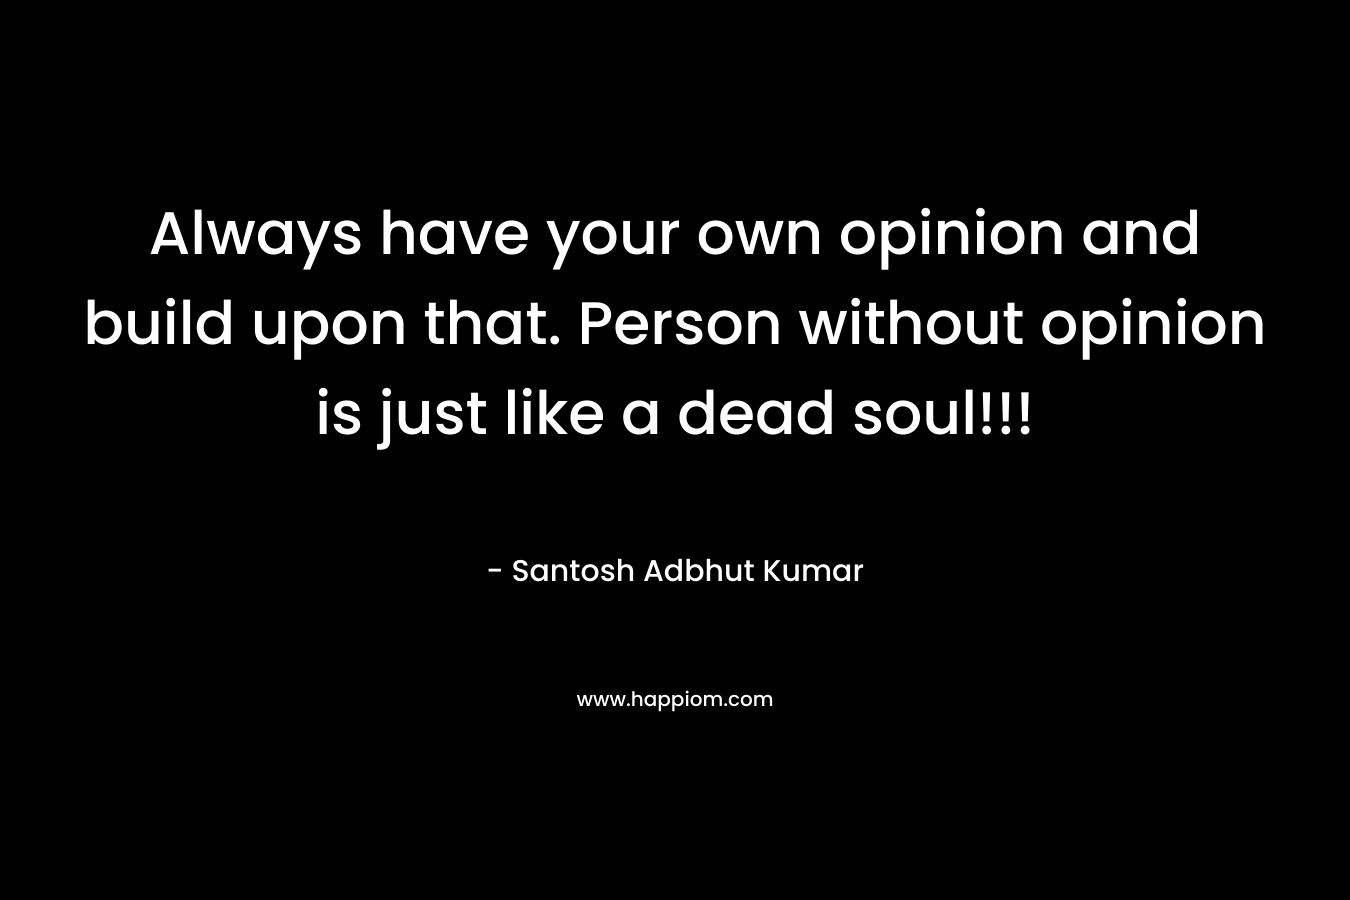 Always have your own opinion and build upon that. Person without opinion is just like a dead soul!!!